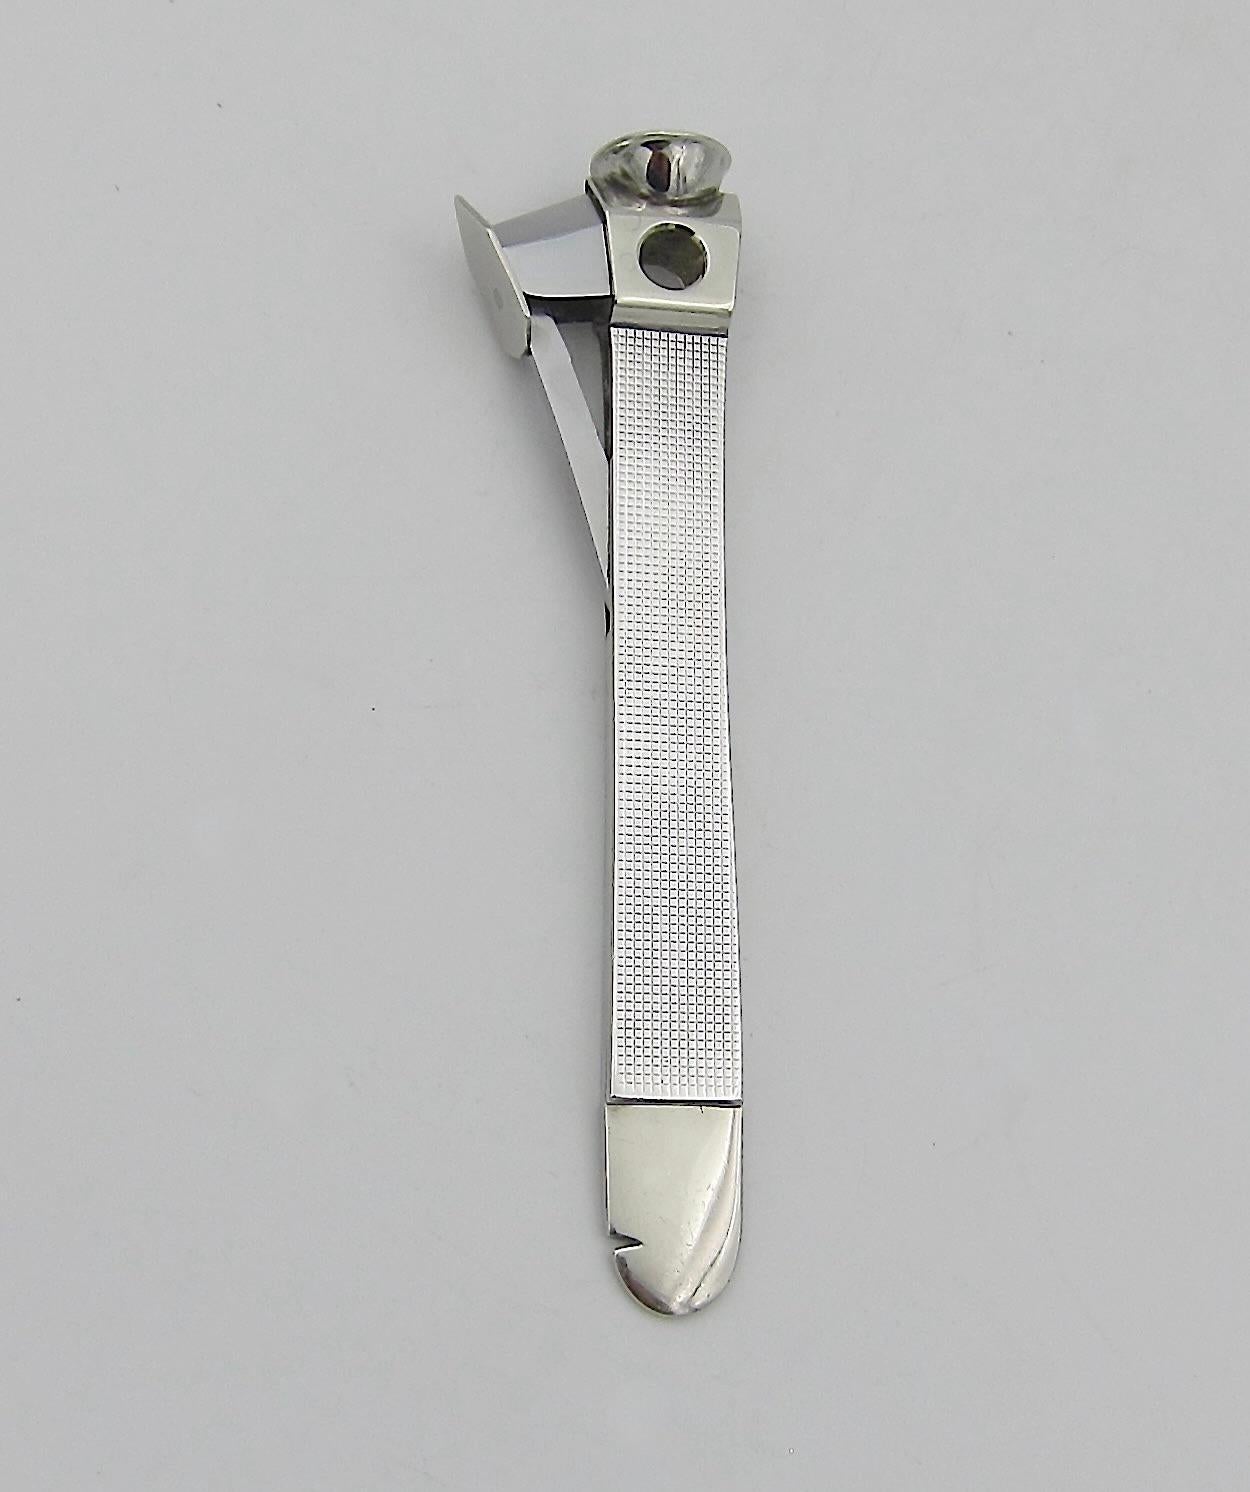 A vintage sterling silver mounted cigar, cheroot, or cigarillo cutter incorporating a German steel blade. The slim and elegant sterling silver handle is decorated on either side with delicate Art Deco lines forming a grid pattern. The cutter has a